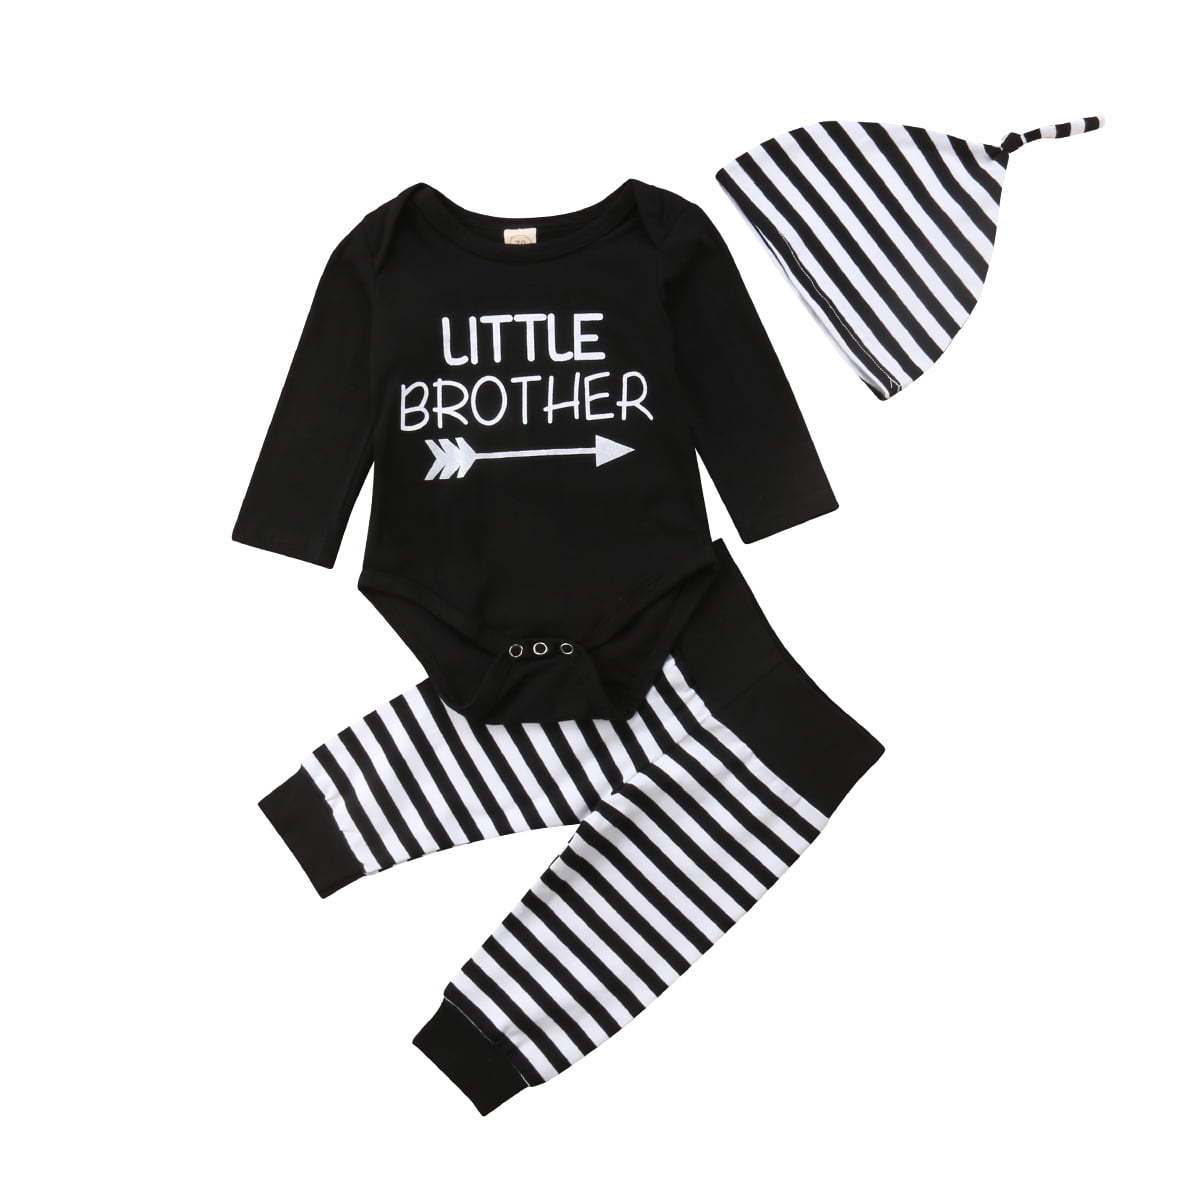 Baby Boy Dinosaur Brother Matching Outfits Toddler Infant Big Little Brother Top Romper+Pants Clothes Set